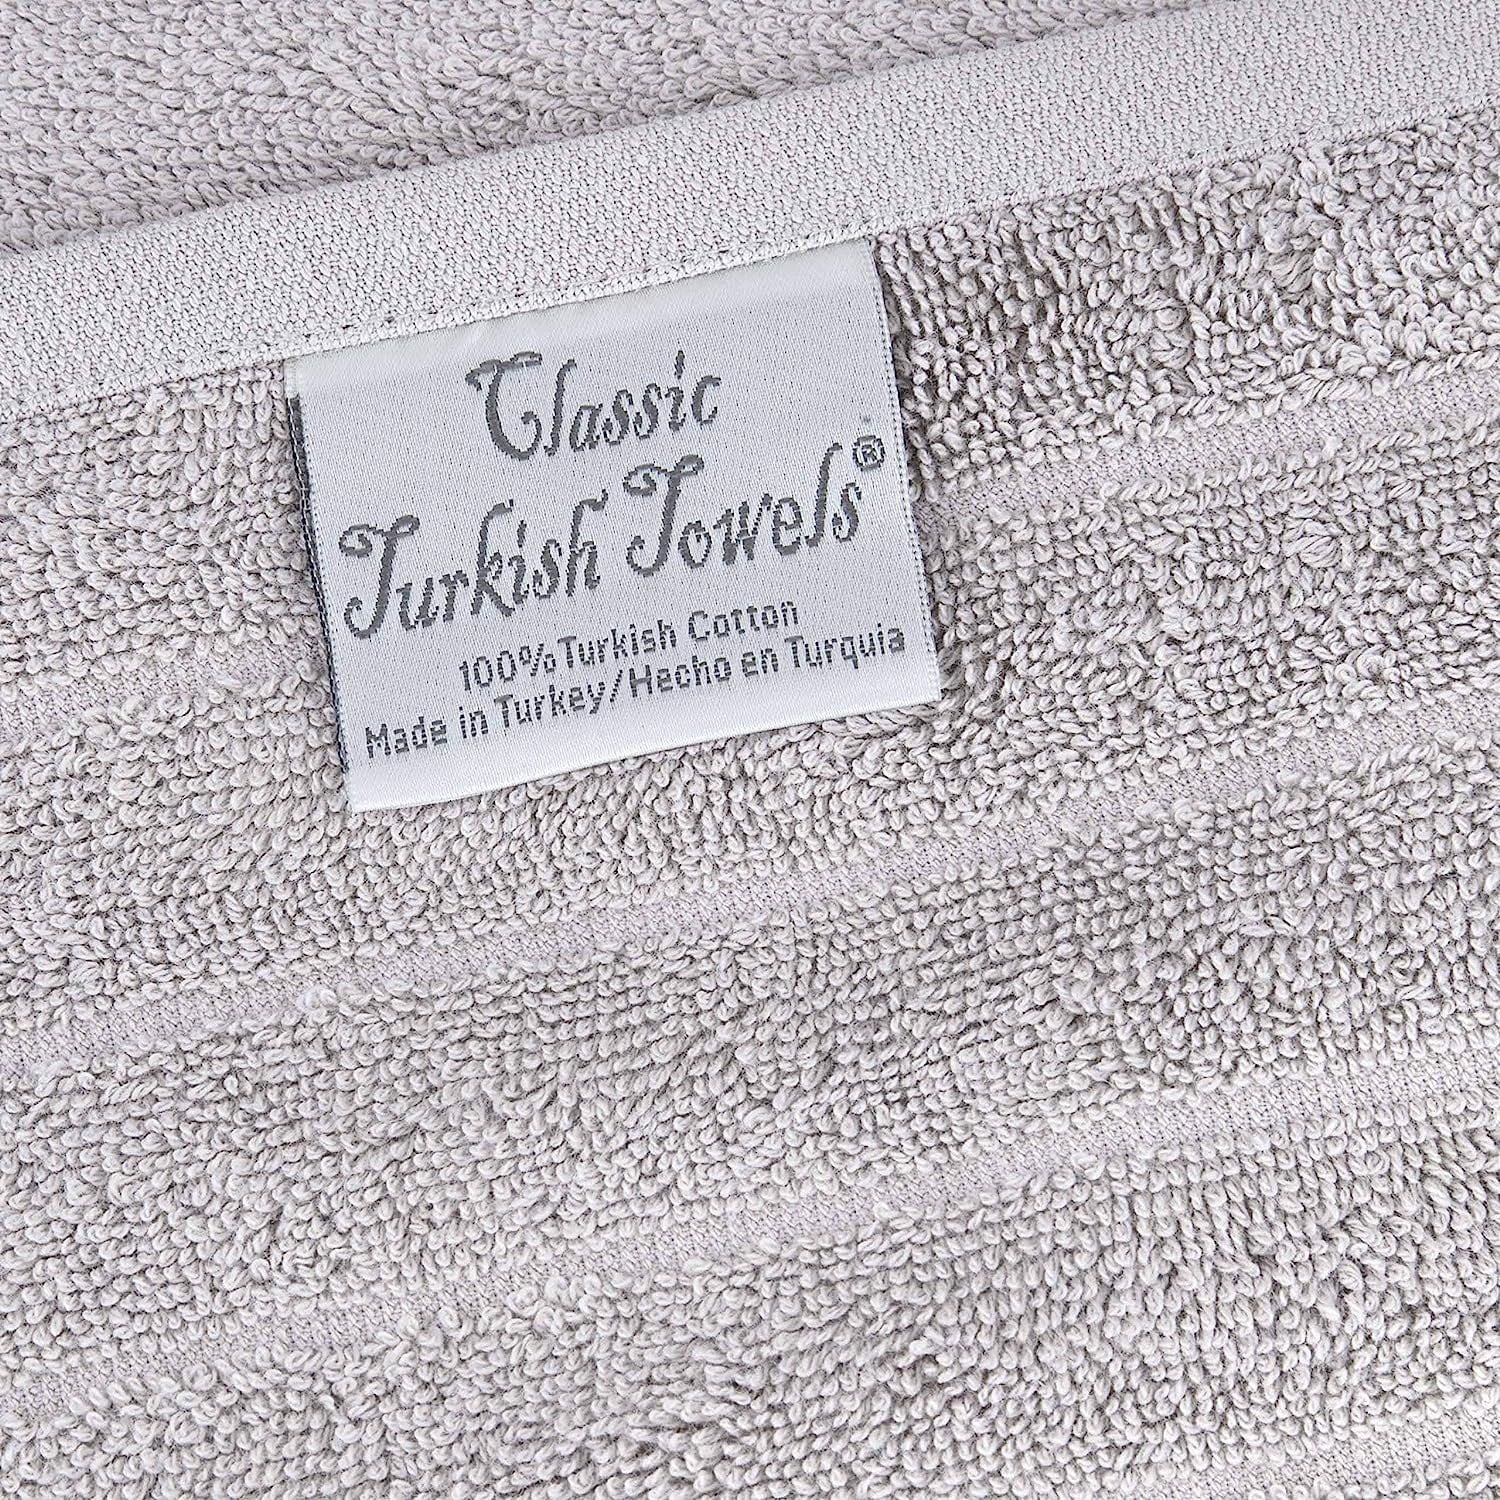 https://ak1.ostkcdn.com/images/products/is/images/direct/42c49c713610dc577c76462f386e474c95c33add/Classic-Turkish-Towels-Plush-Ribbed-Cotton-Luxurious-Bath-Sheets-%28Set-of-3%29-40x65%22.jpg